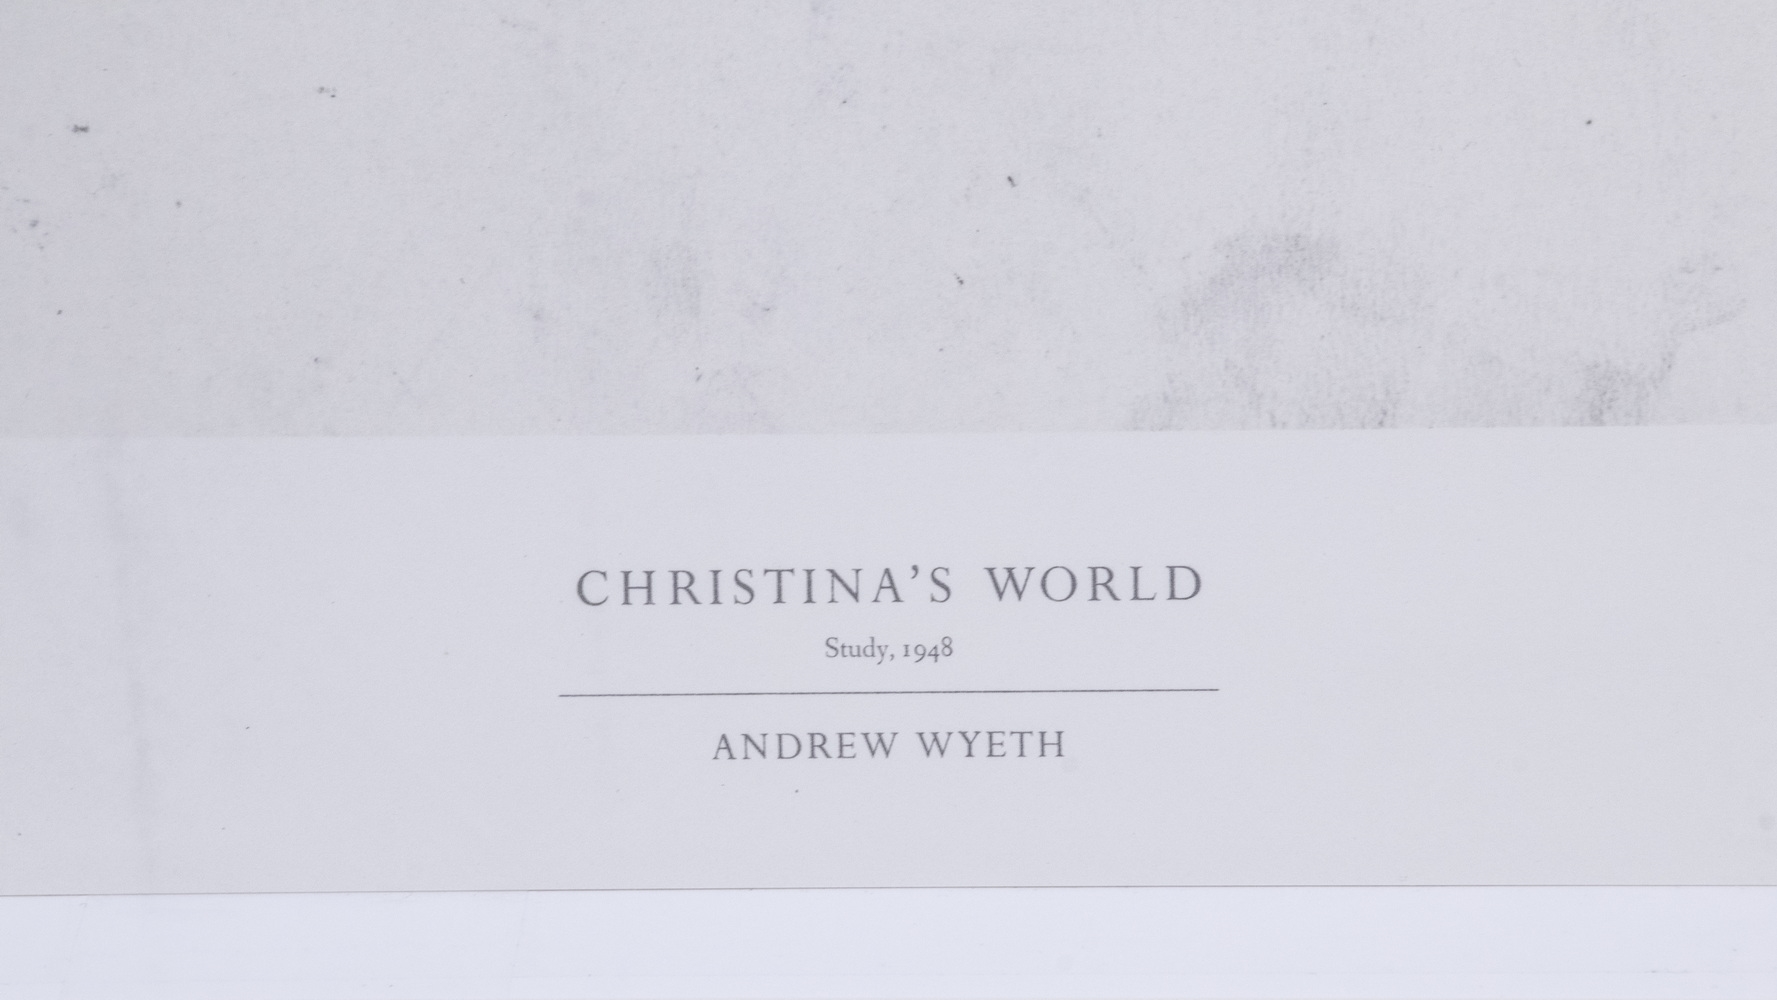 Artwork by Andrew Wyeth, "Christina's World", Made of collotype print